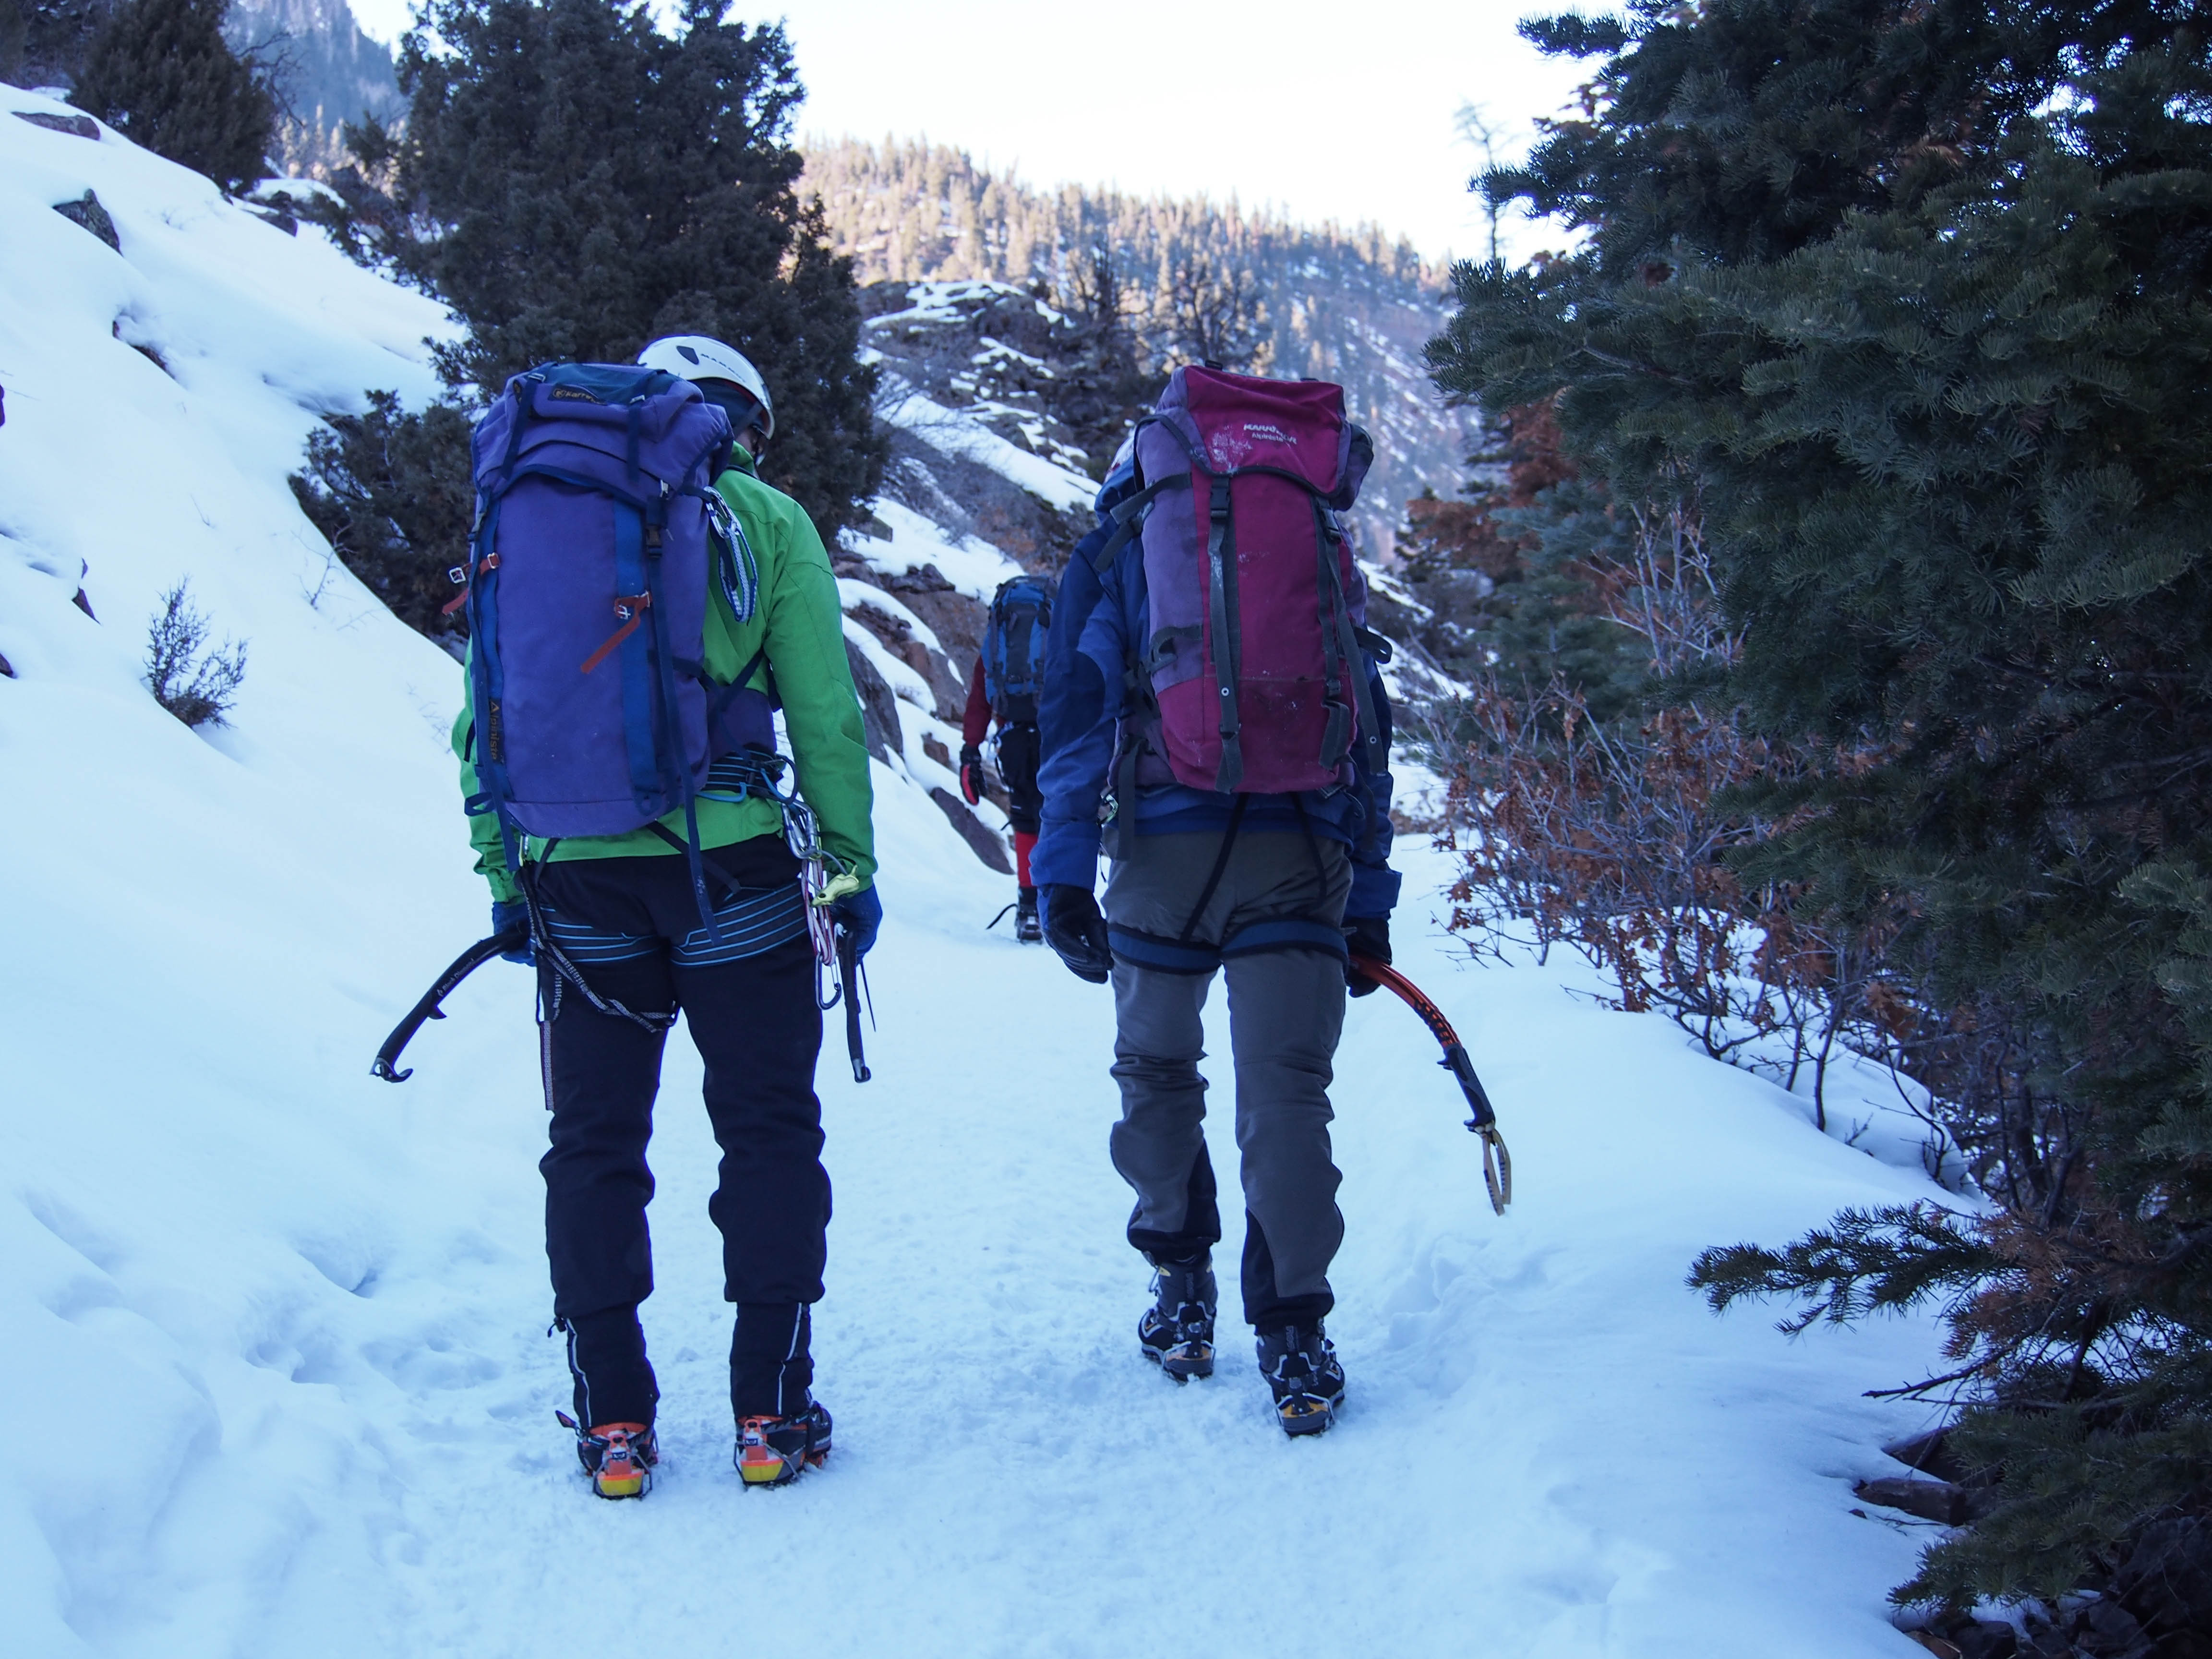 Two generations of Karrimor Alpiniste backpacks, and two generations of climbers